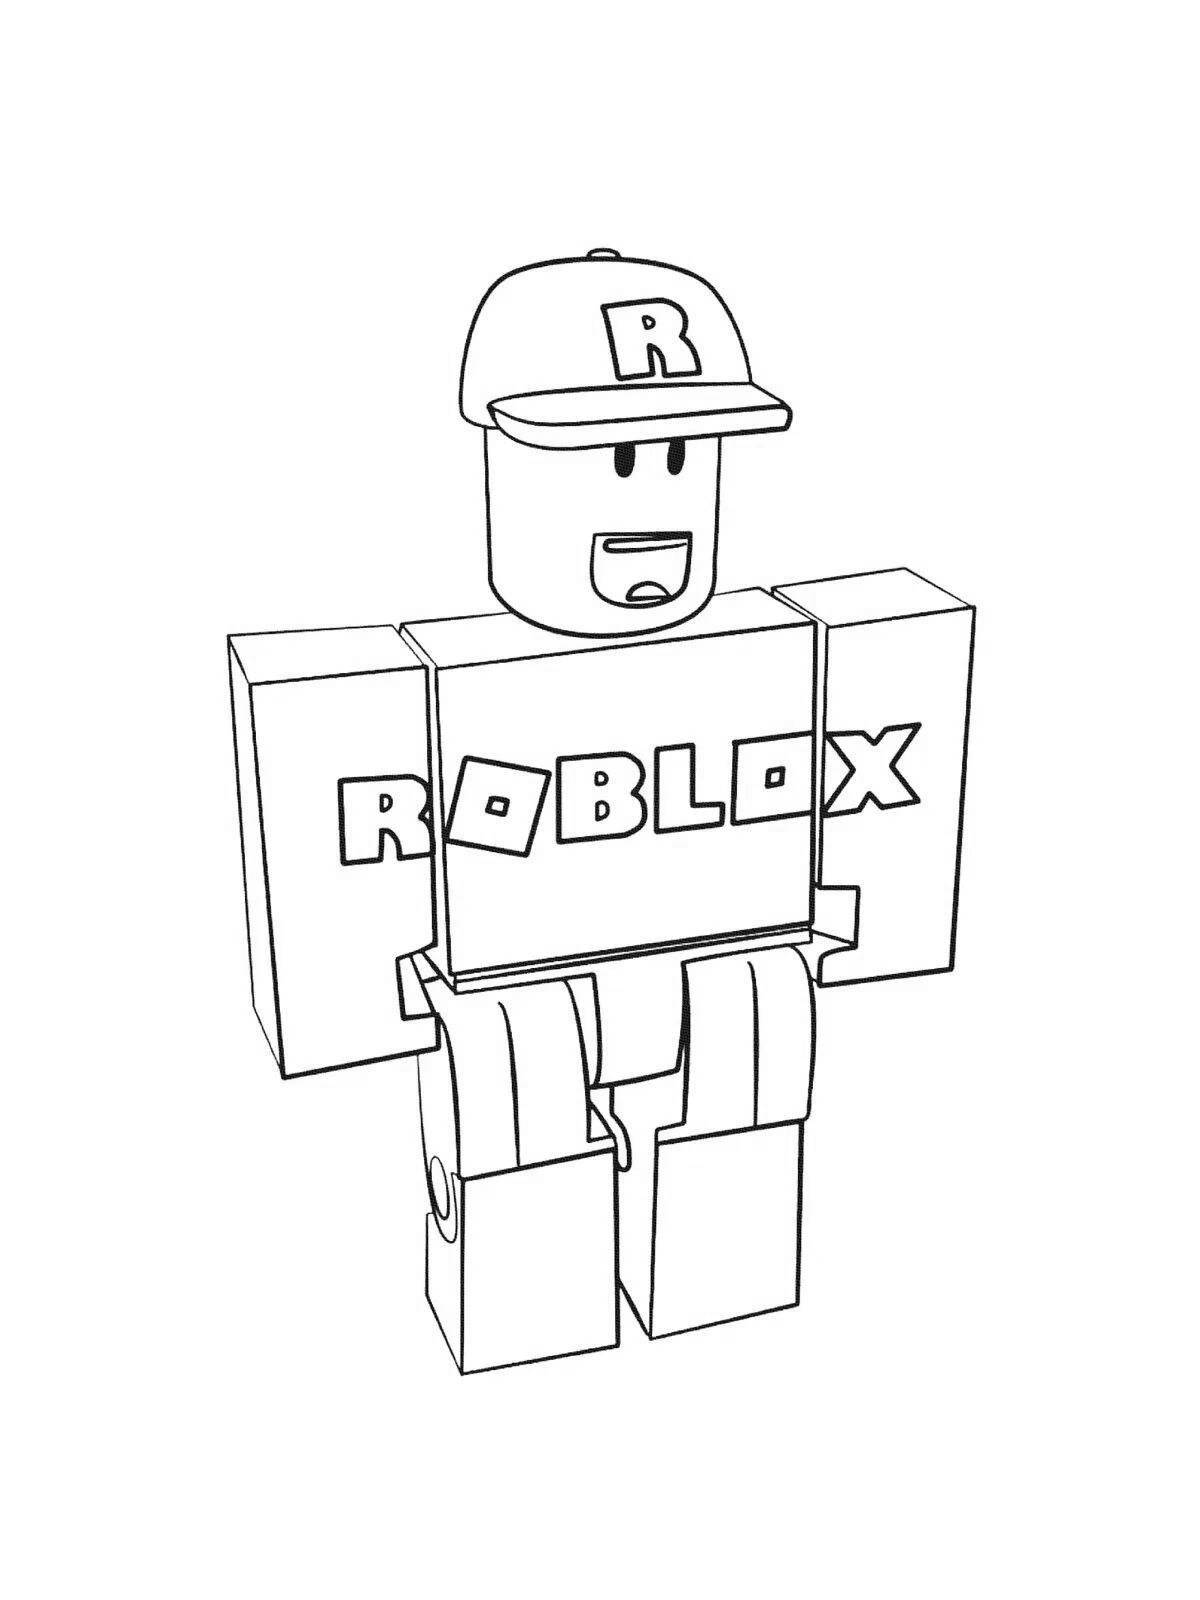 With roblox #1